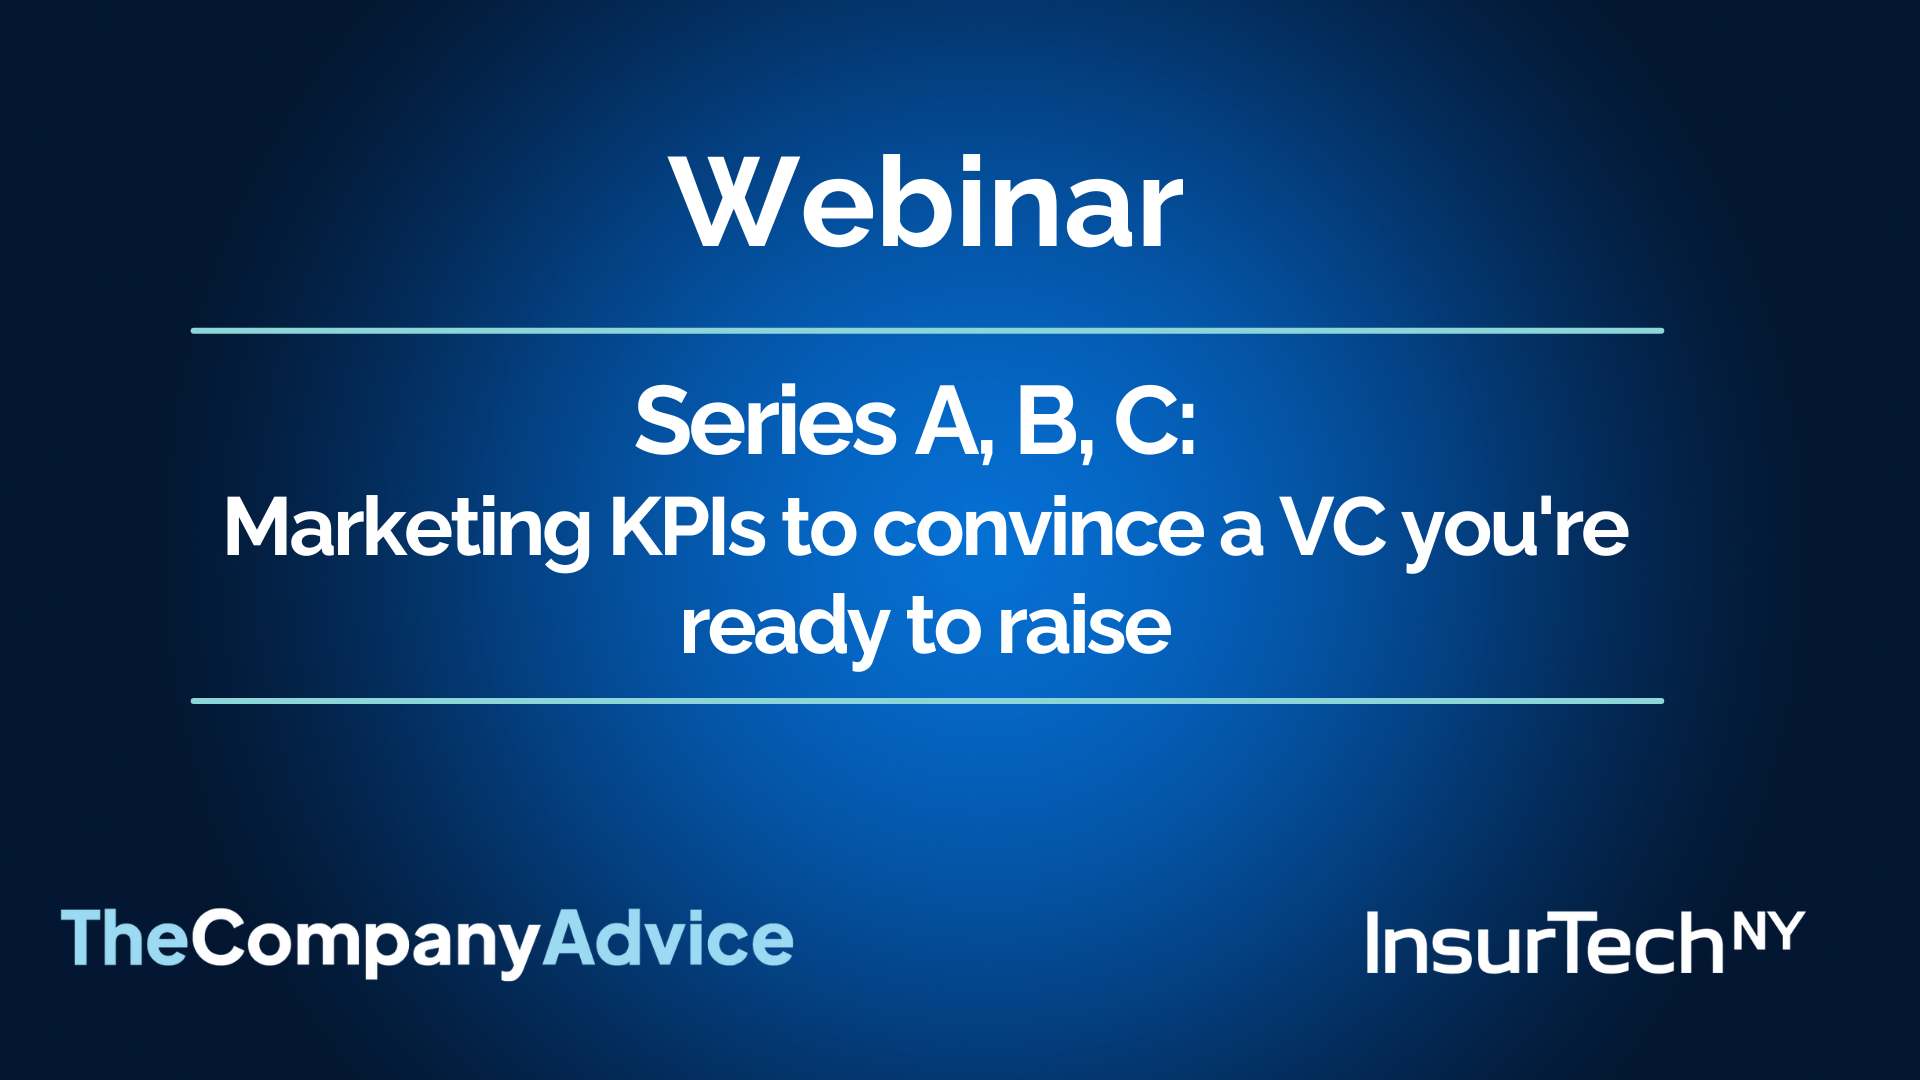 Series A, B, C: Marketing KPIs to convince a VC you’re ready to raise